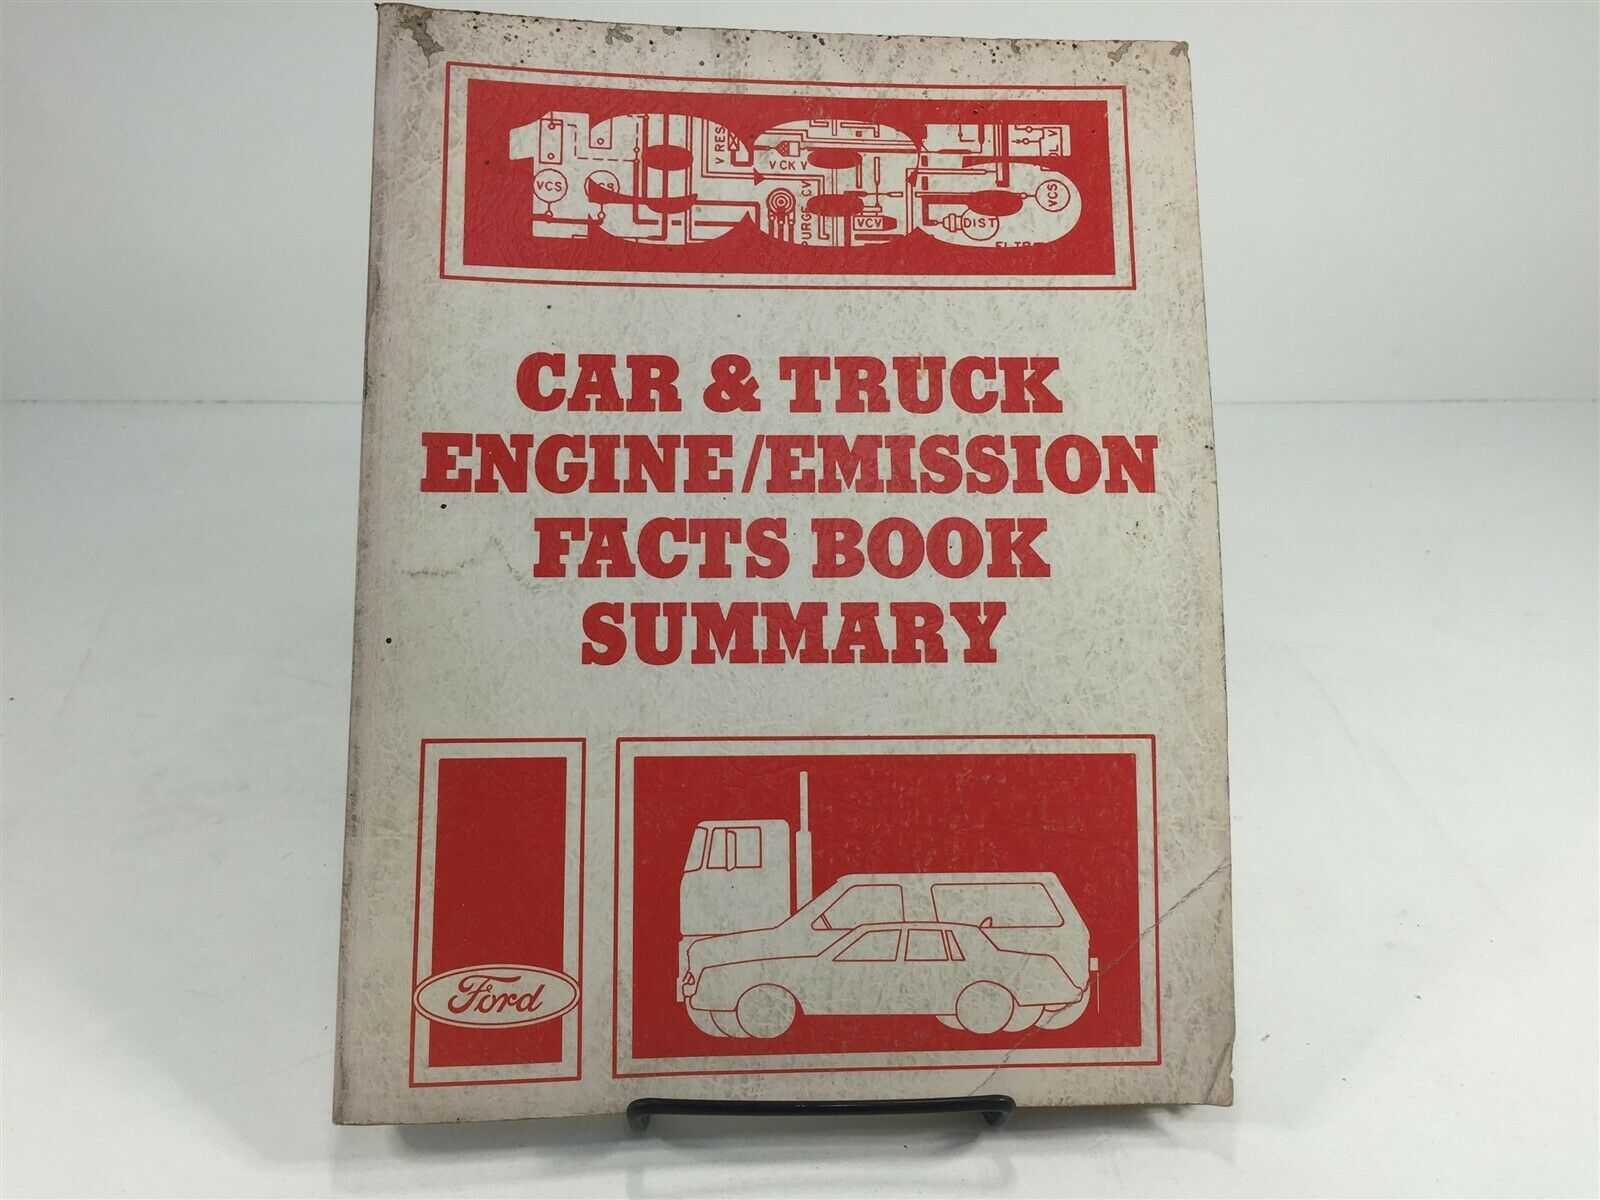 1985 Ford Car & Truck Engine Emission Facts Book Summary - $14.99